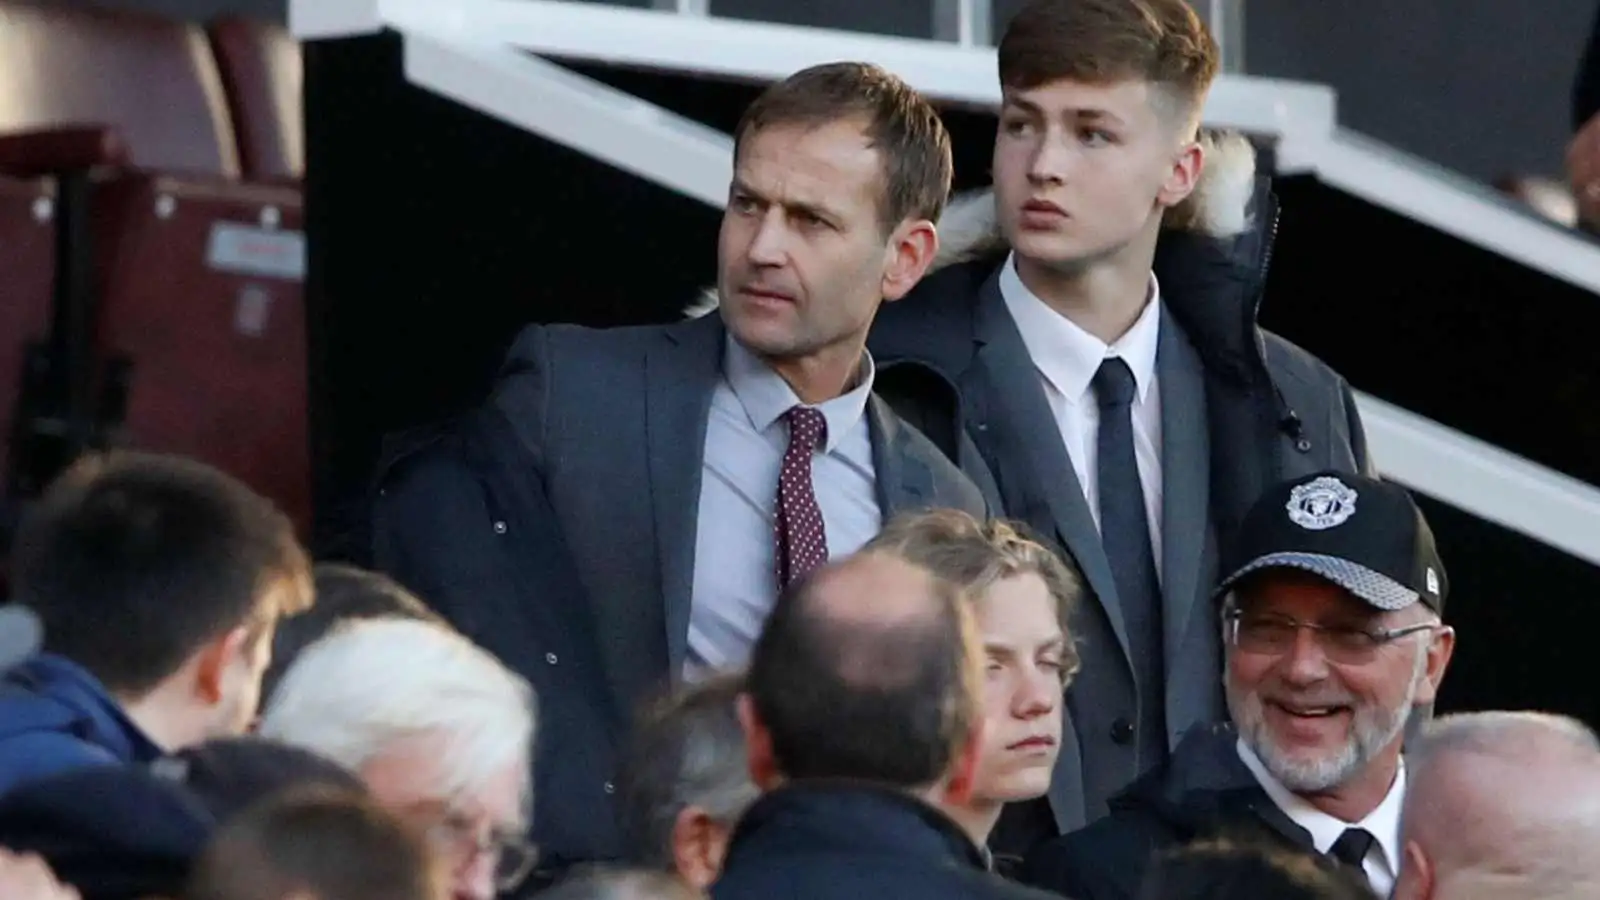 Newcastle sporting director Dan Ashworth in the stands during a match